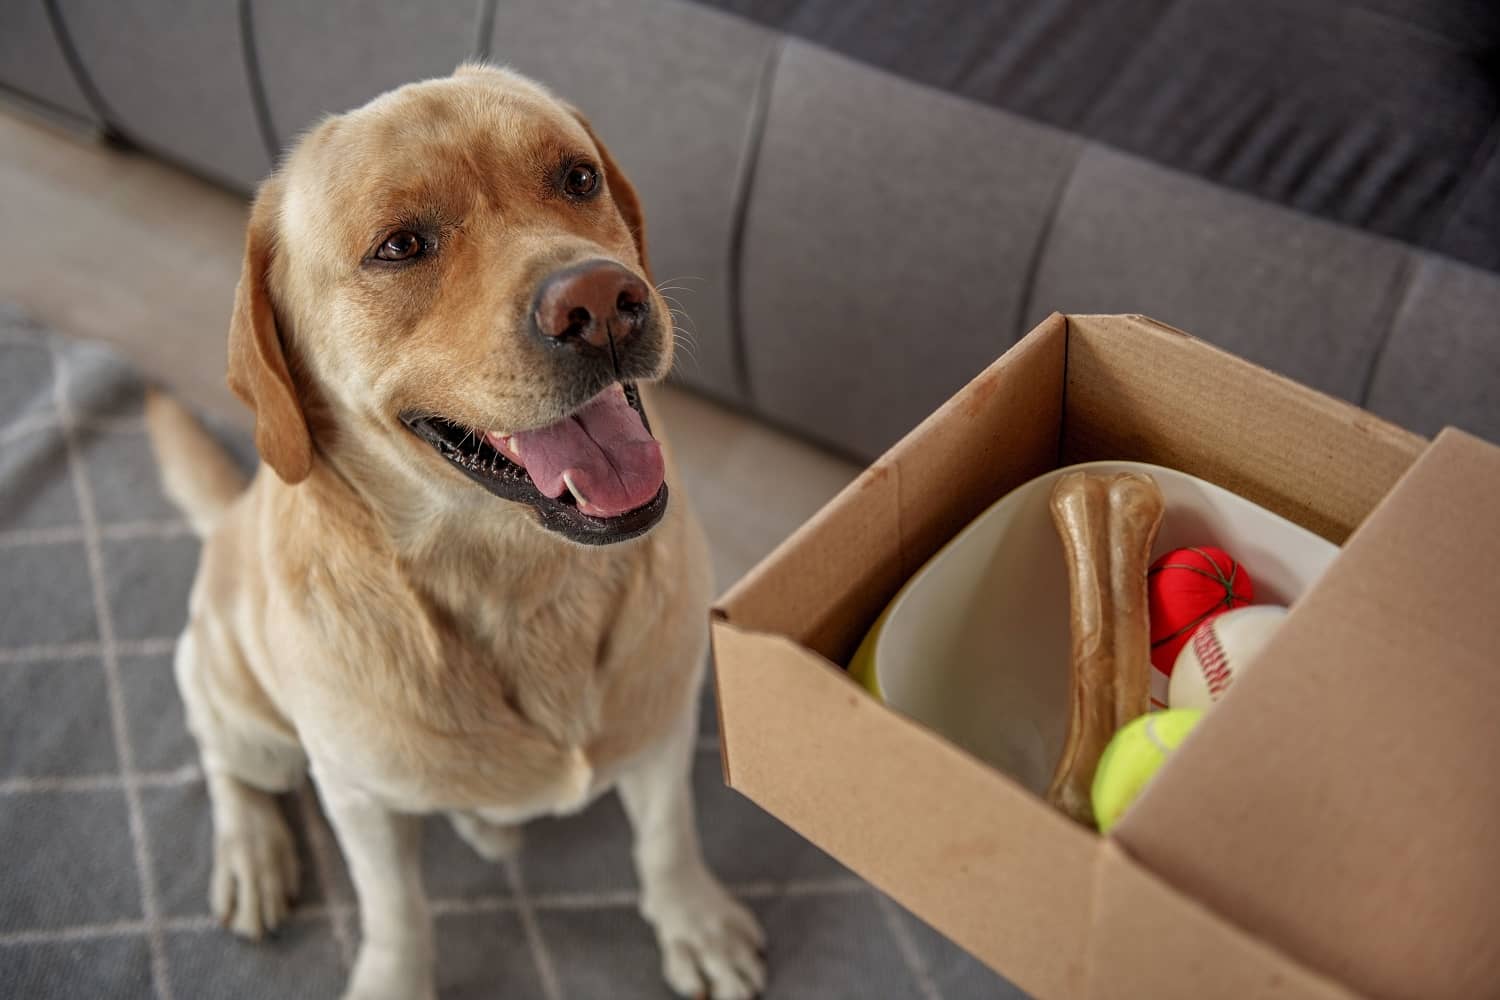 Dog being presented with a box of toys and treats ready for moving home